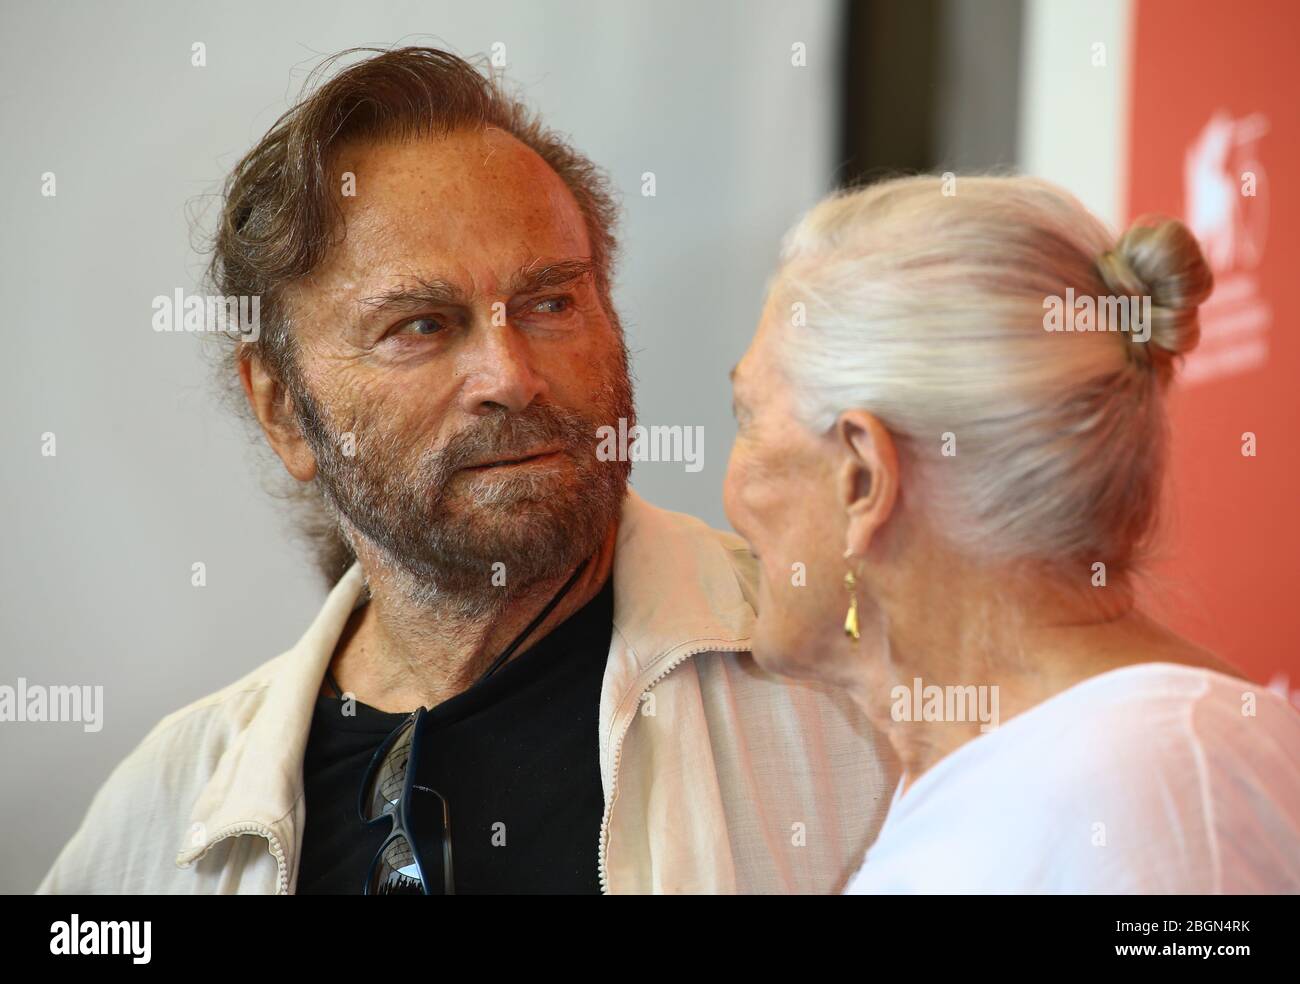 VENICE, ITALY - AUGUST 29: Franco Nero and Vanessa Redgrave attends a photocall where she is awarded a Lifetime Achievement Award Stock Photo